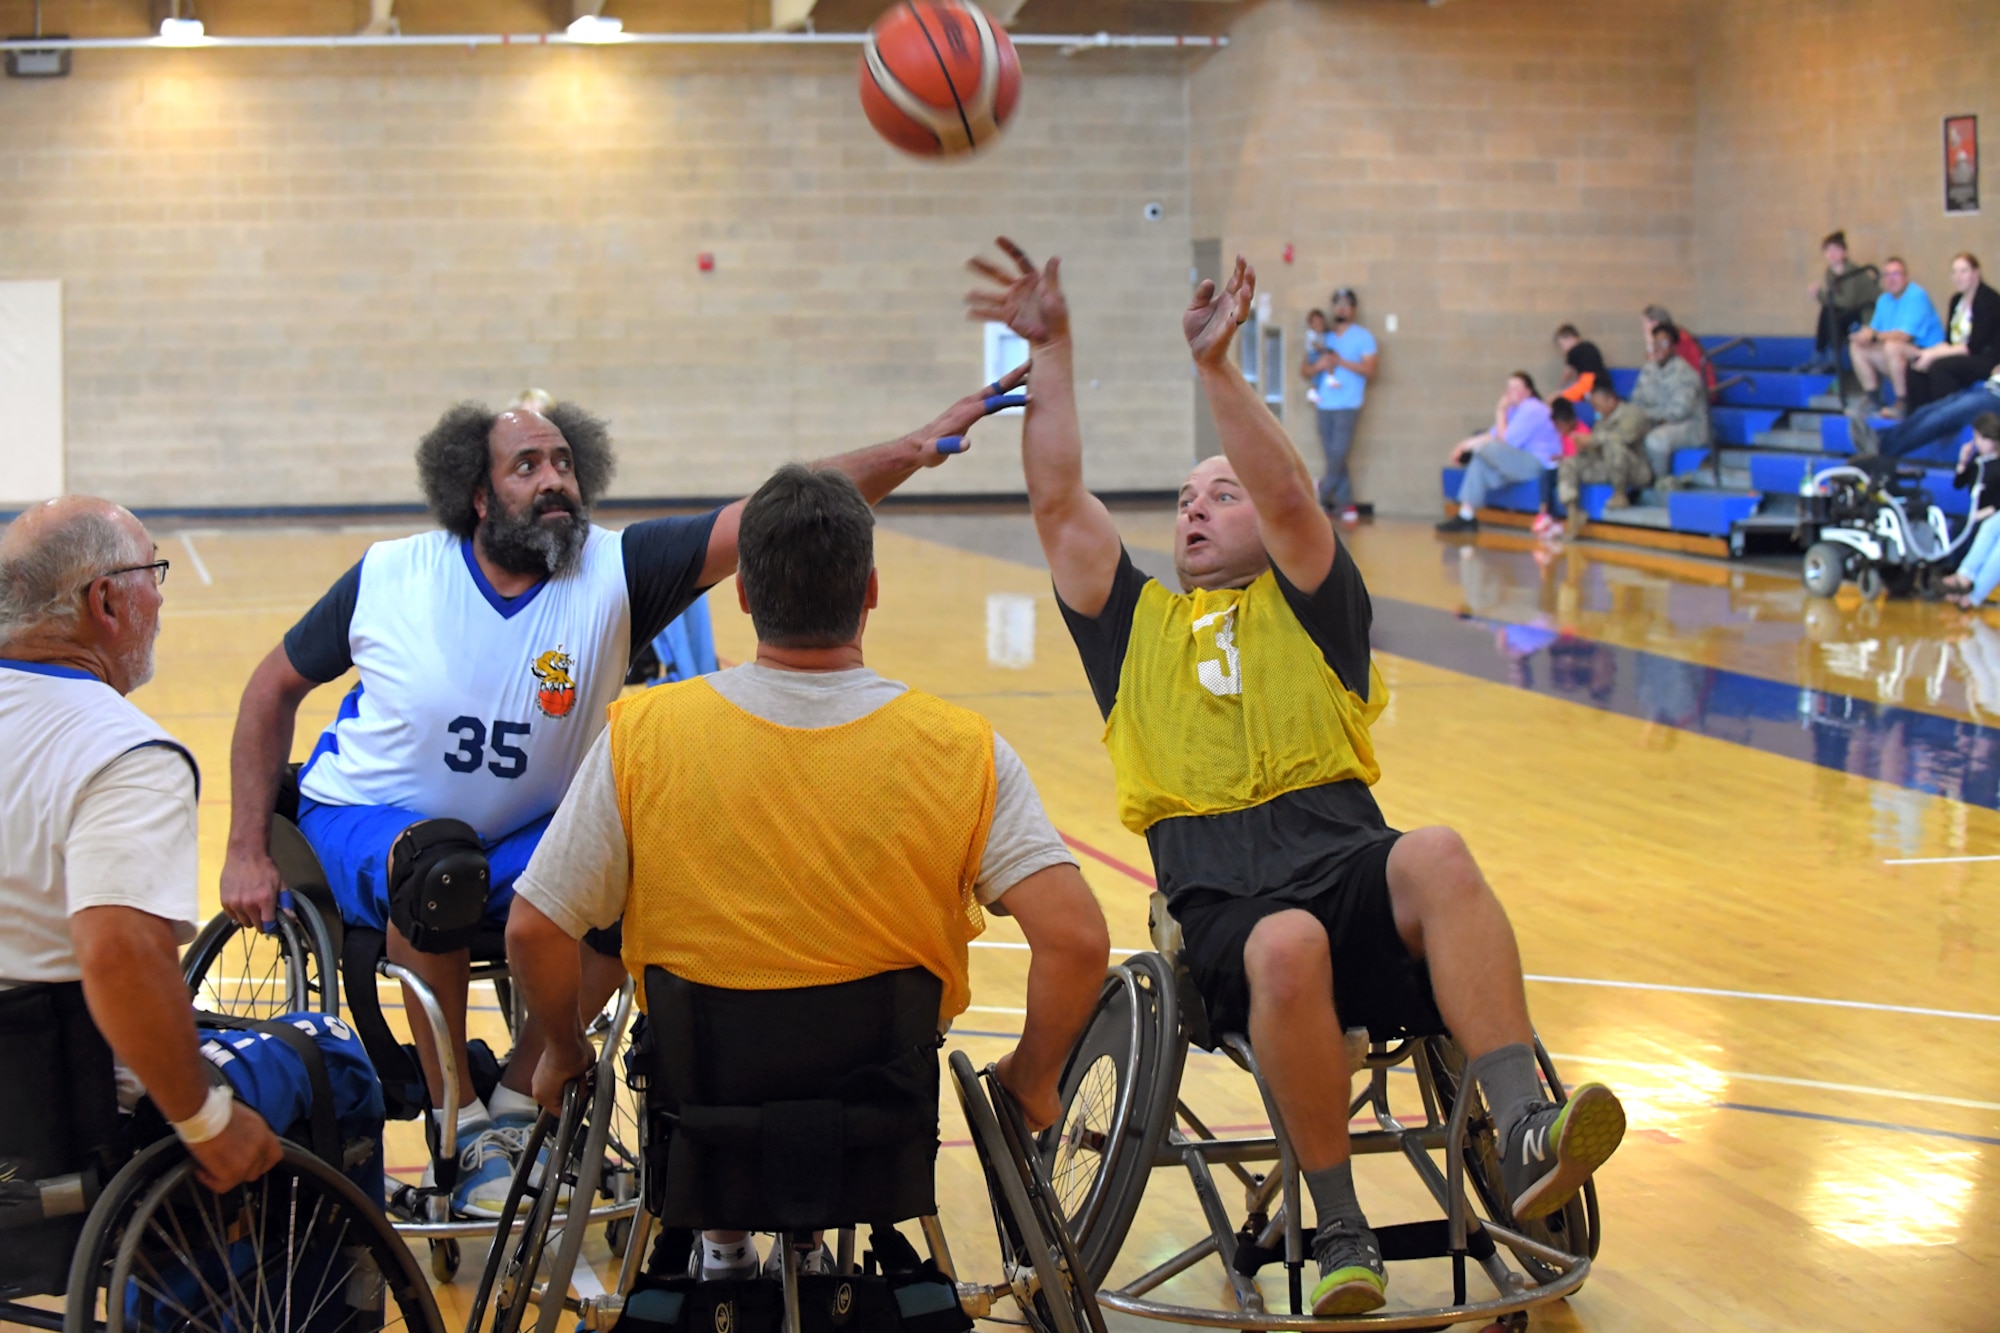 Players scramble for possession of the ball during a wheelchair basketball game Oct. 3, 2018, at Hill Air Force Base, Utah. Leadership from units across the base faced off against Ogden's Wheelin' Wildcarts, a semi-professional wheelchair basketball team, to celebrate Disability Awareness Month. (U.S. Air Force photo by Todd Cromar)